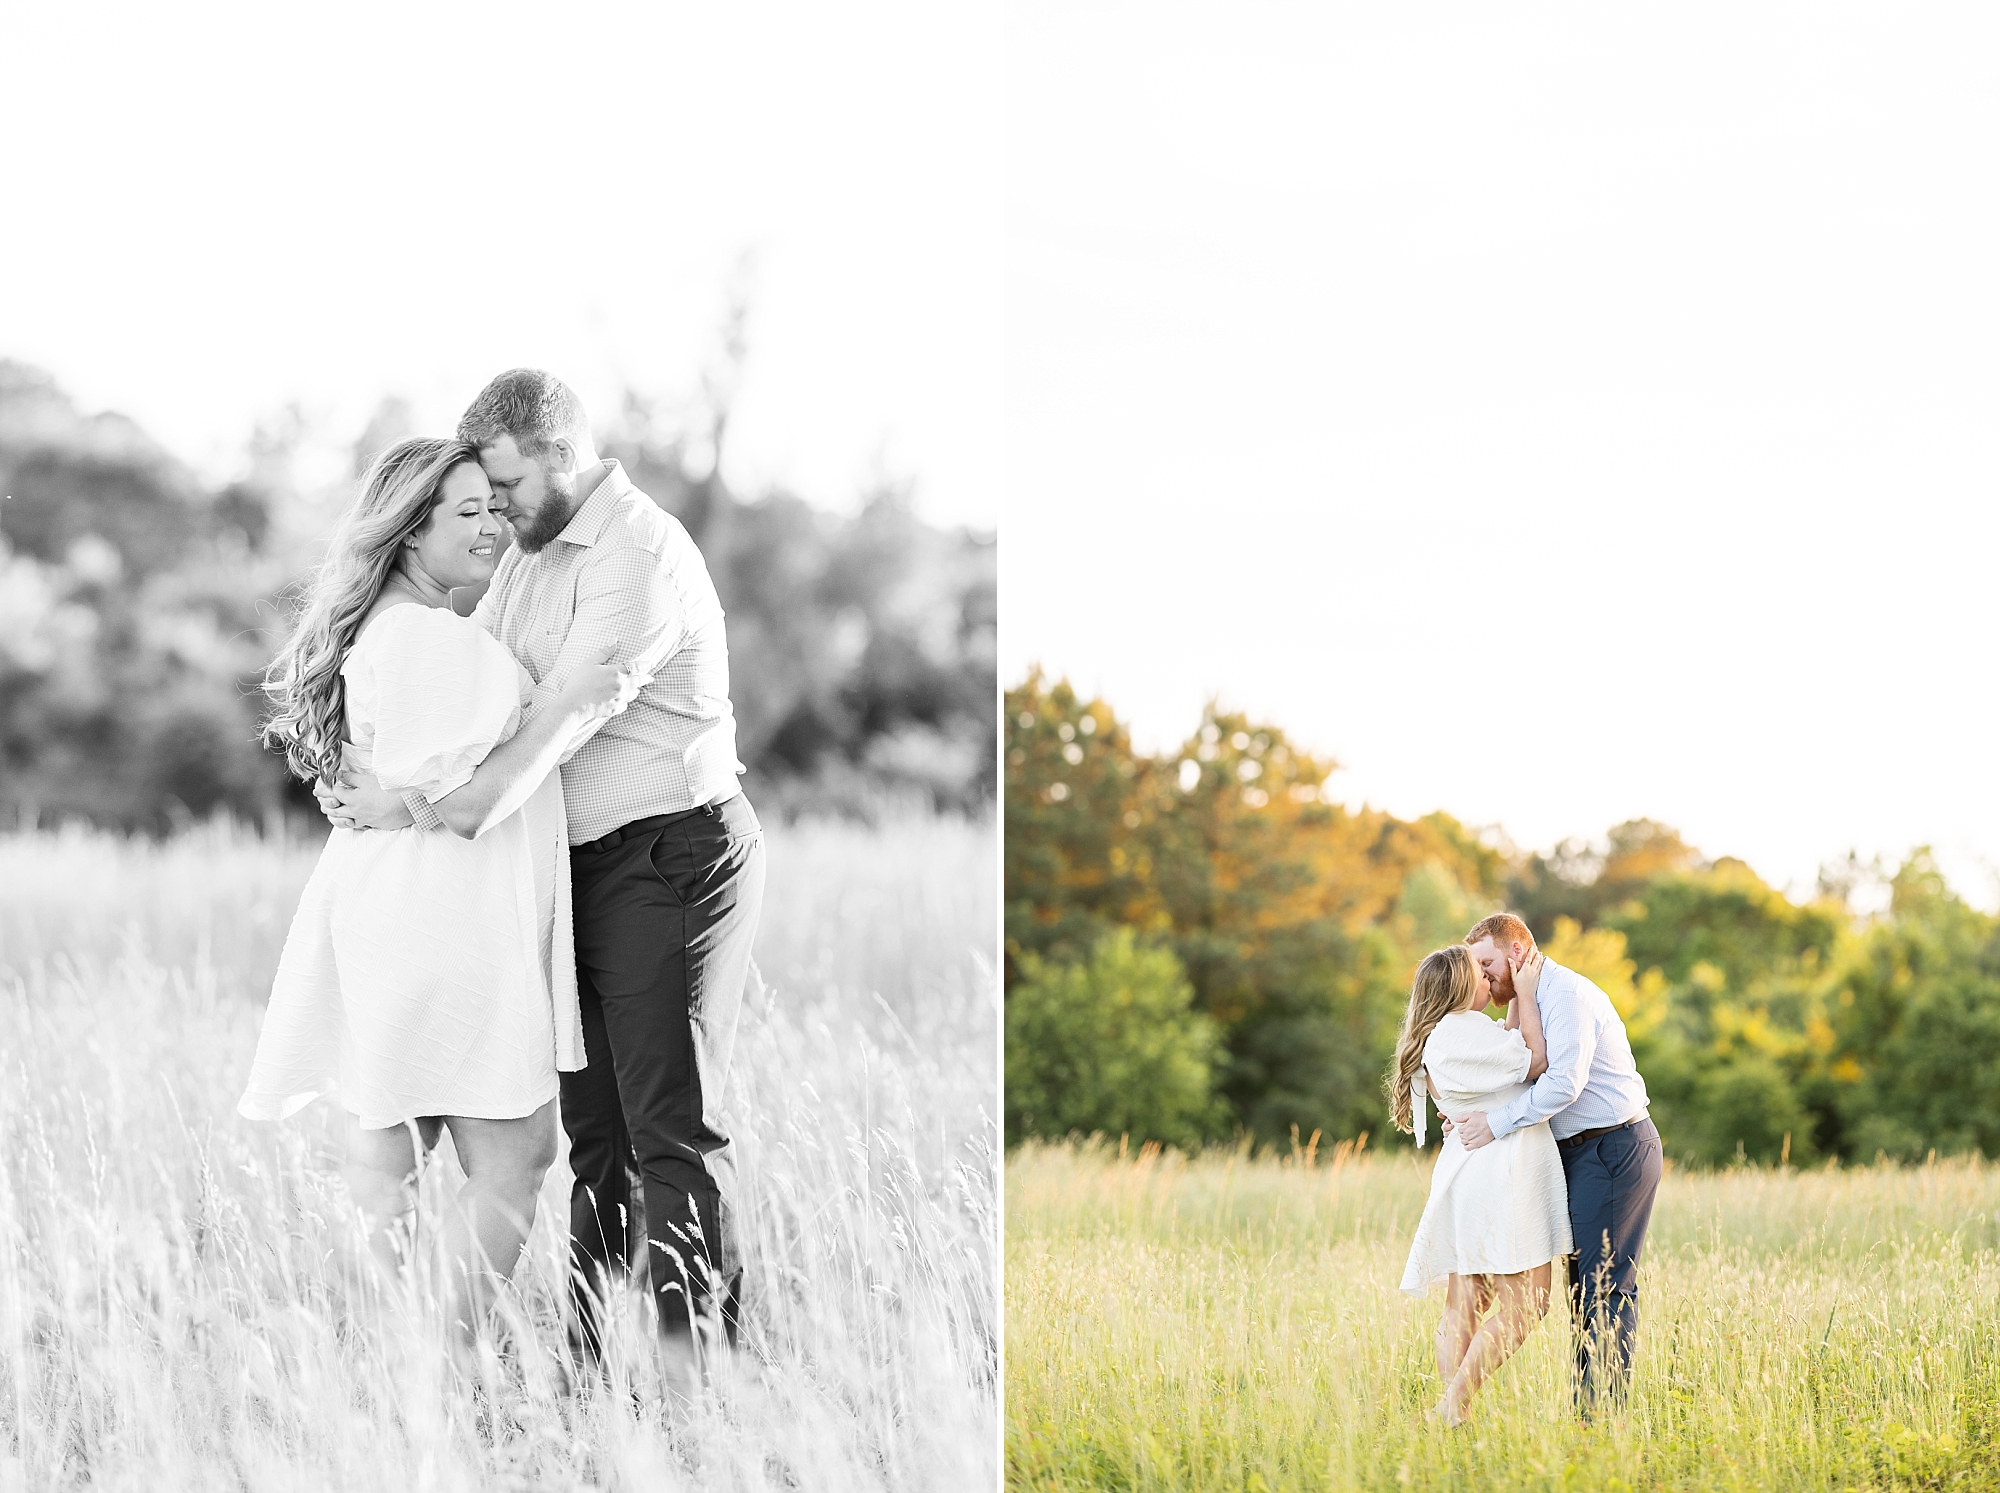 Romantic engagement photos in a field in Raleigh, NC | Raleigh NC Engagement Photographer